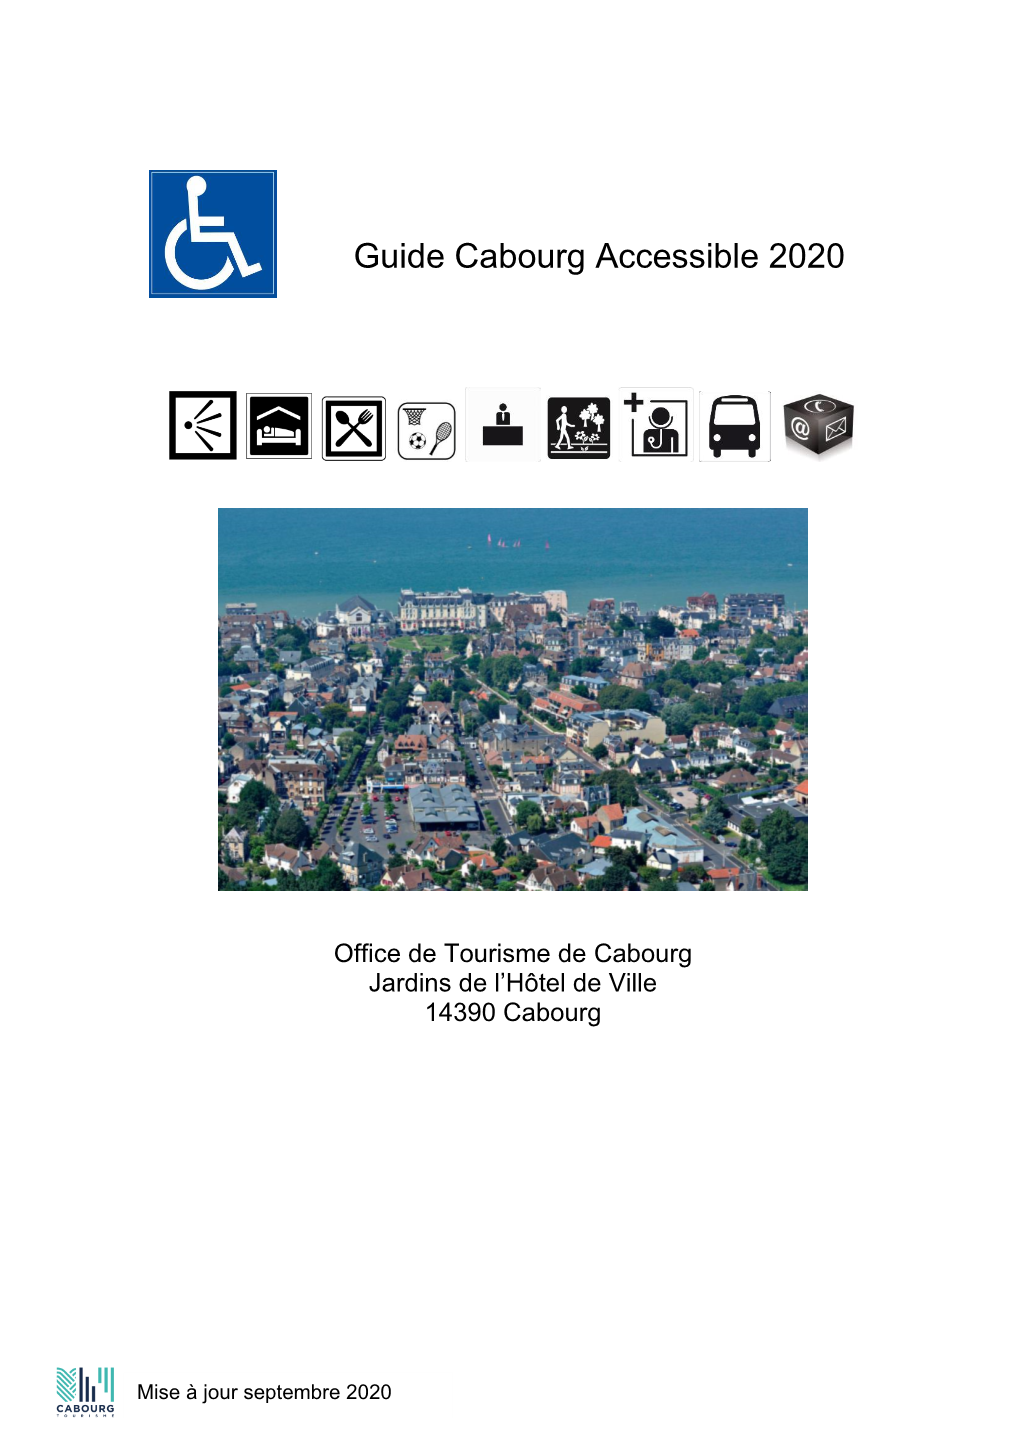 Guide Cabourg Accessible 2020